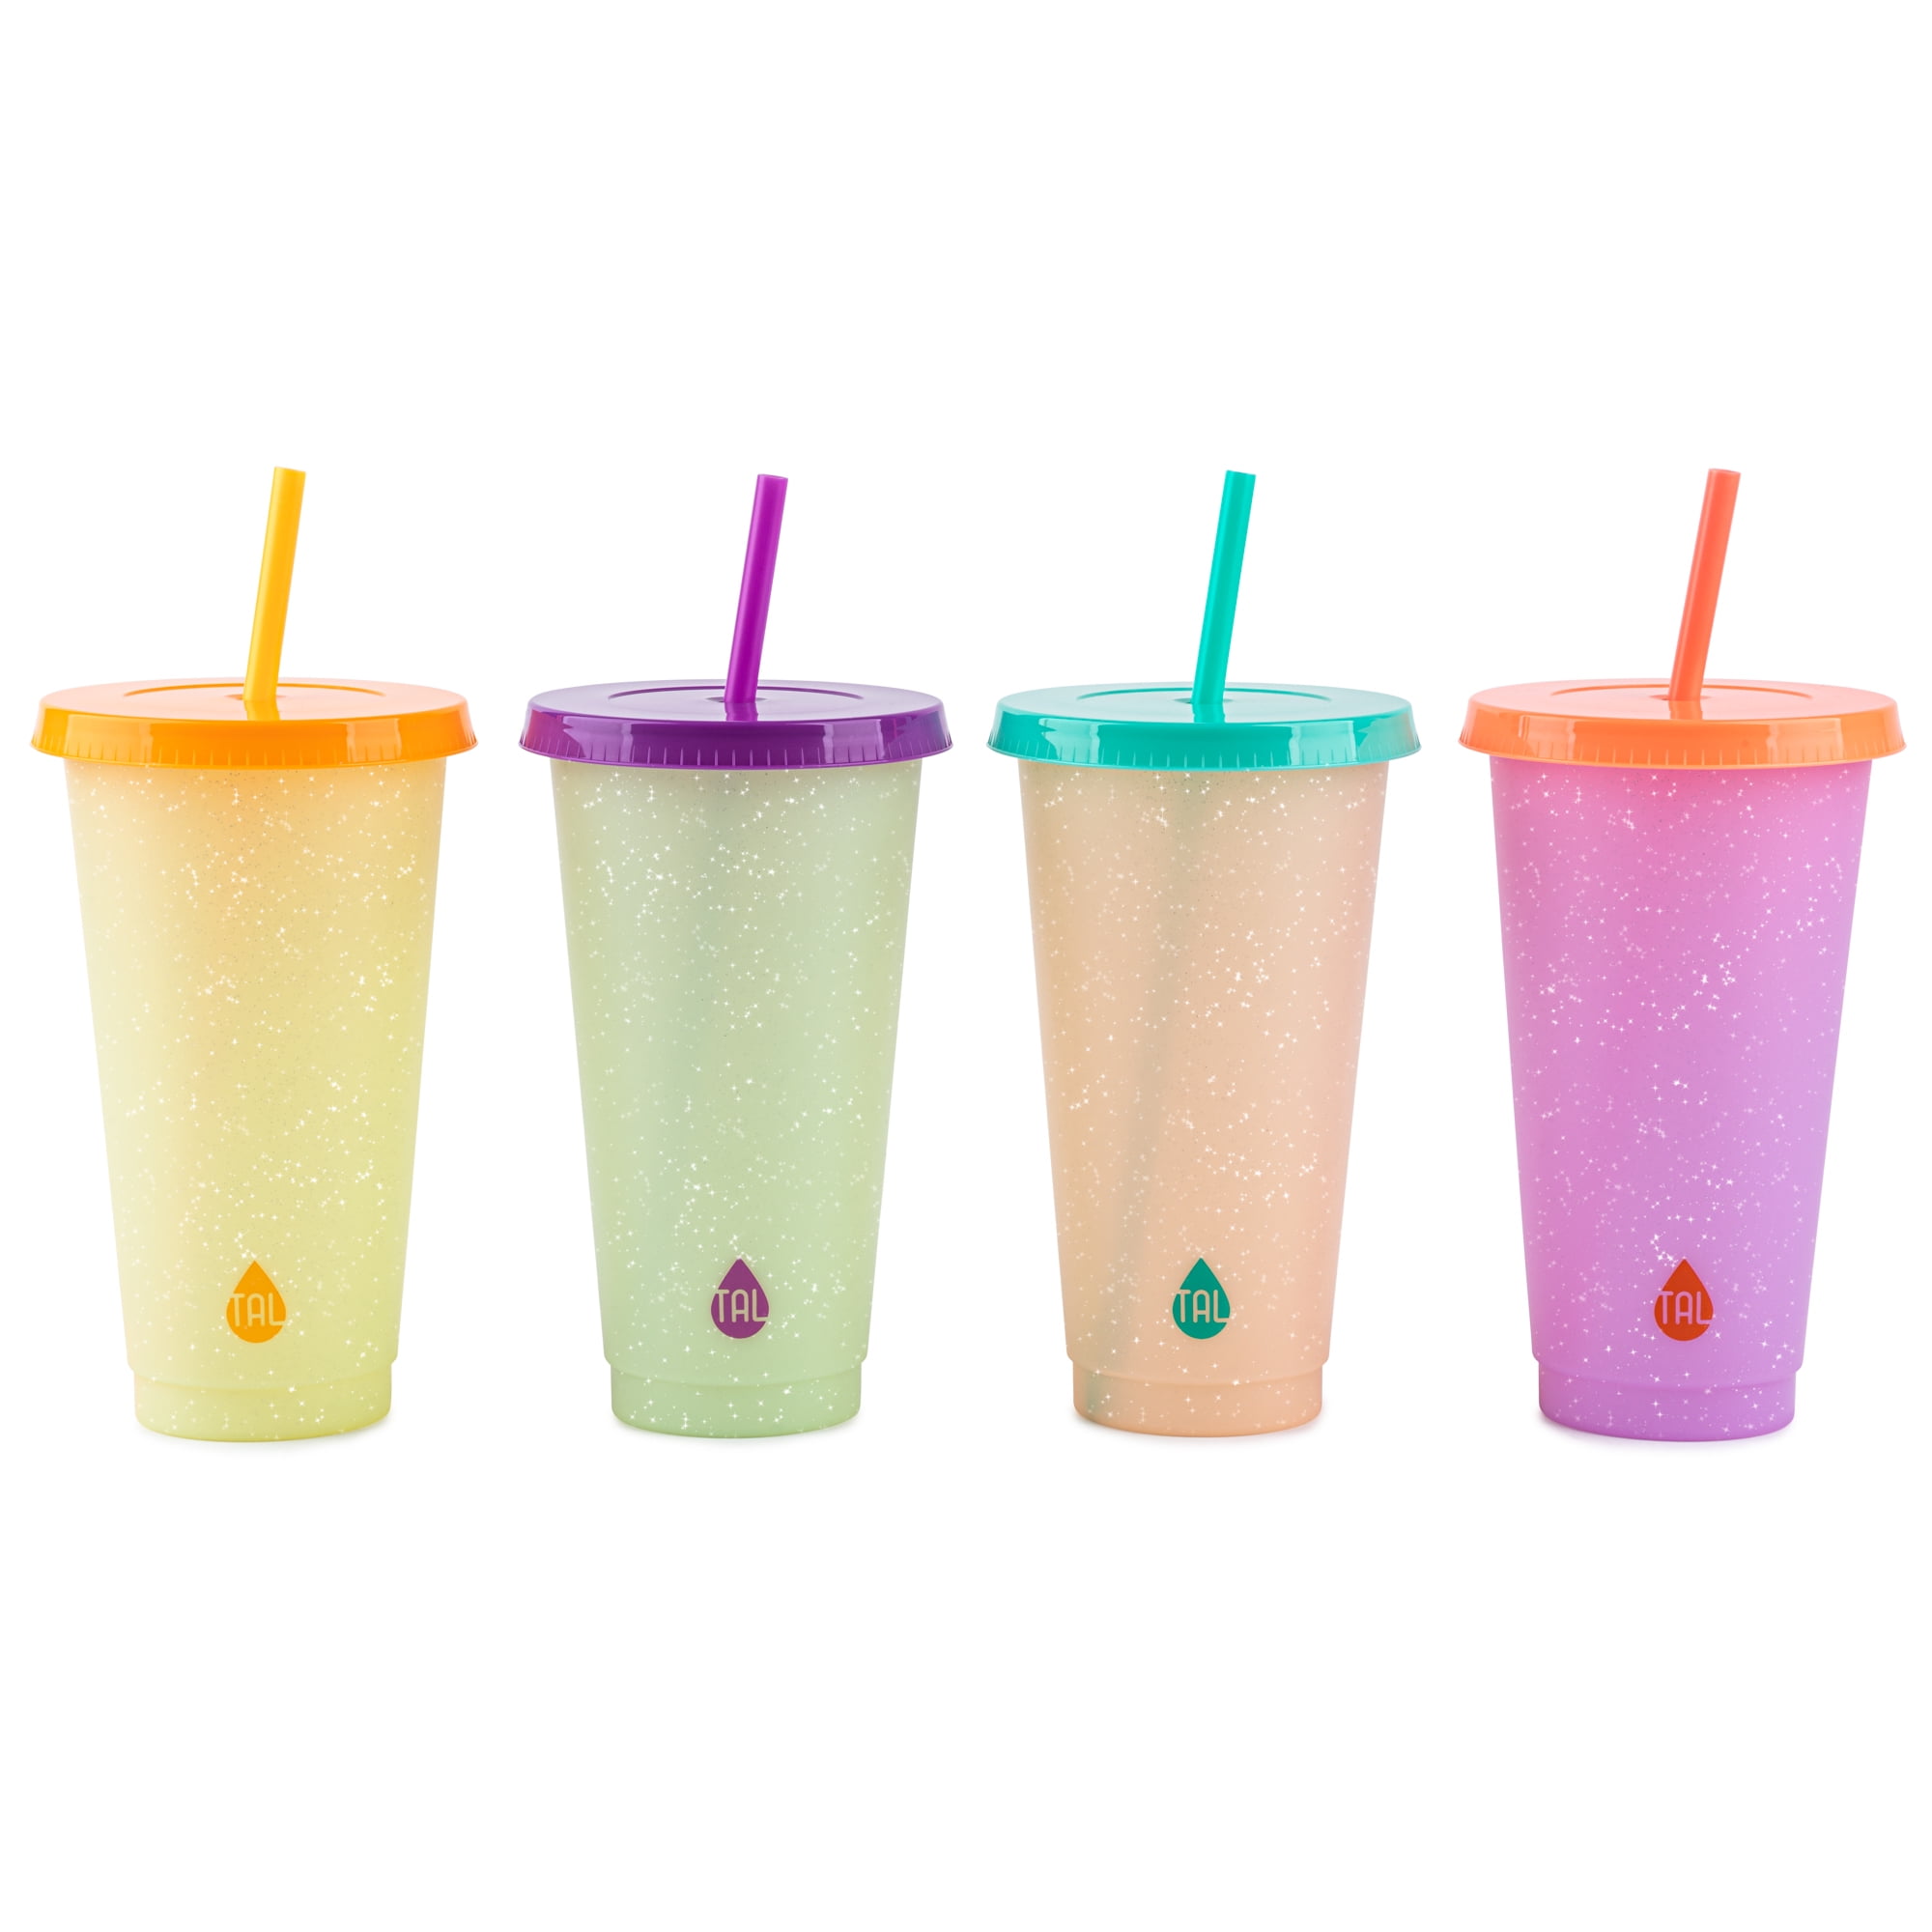 TAL Color Changing To-Go Reusable Hot Cups Set, 16 oz, 4 Pack